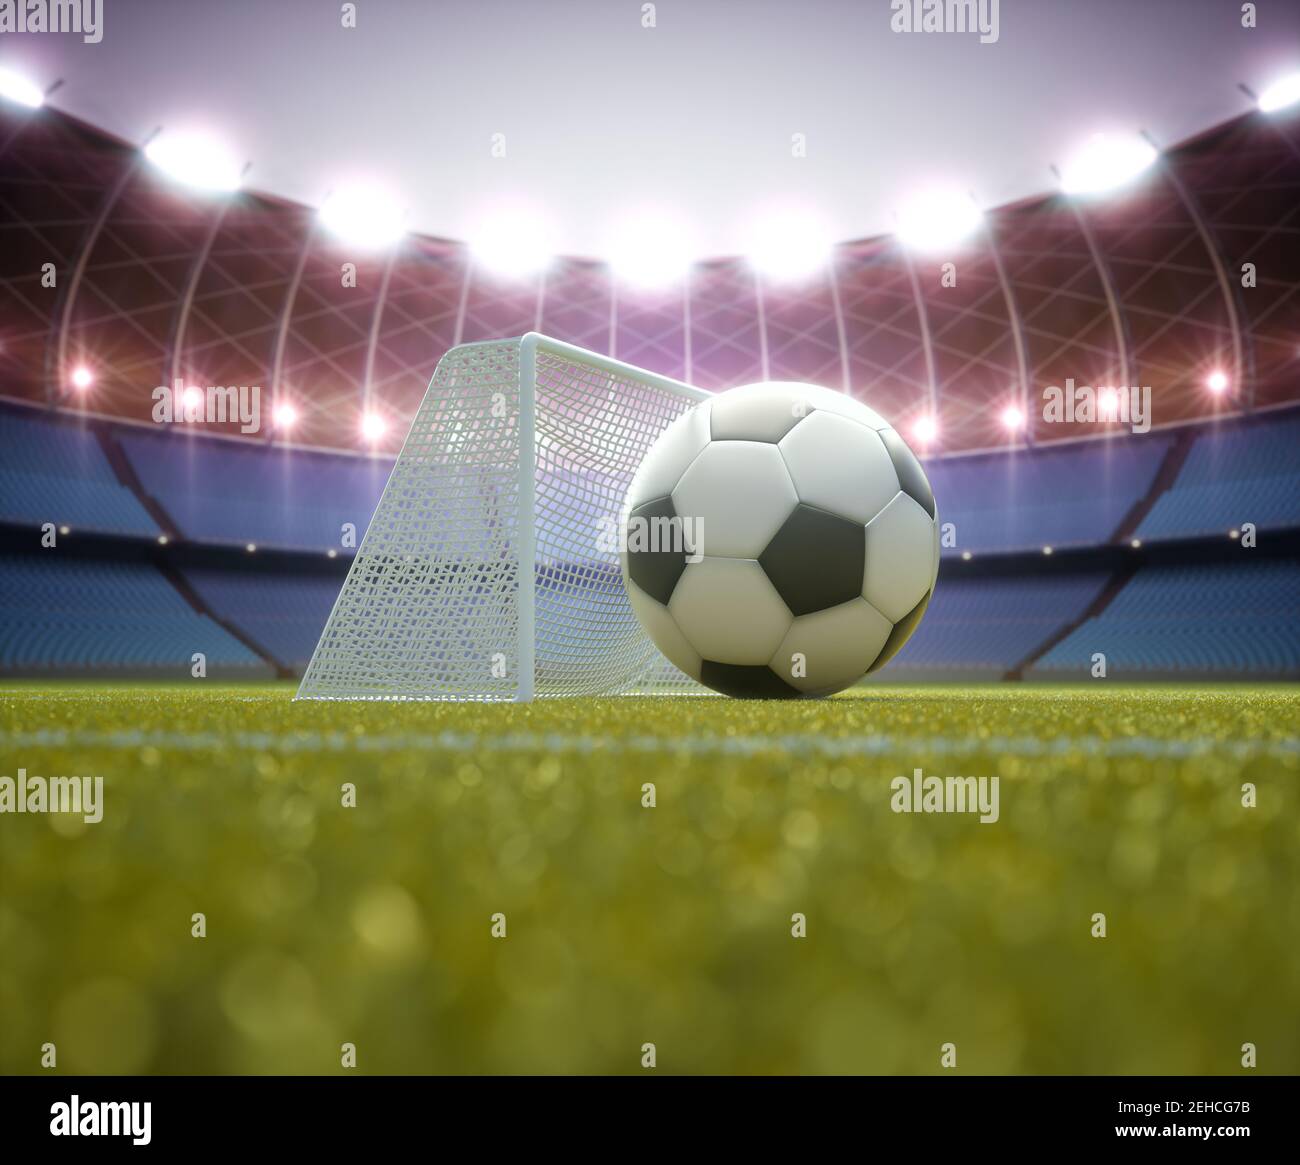 Soccer ball bigger than the goal. Game concept impossible to score. Stock Photo